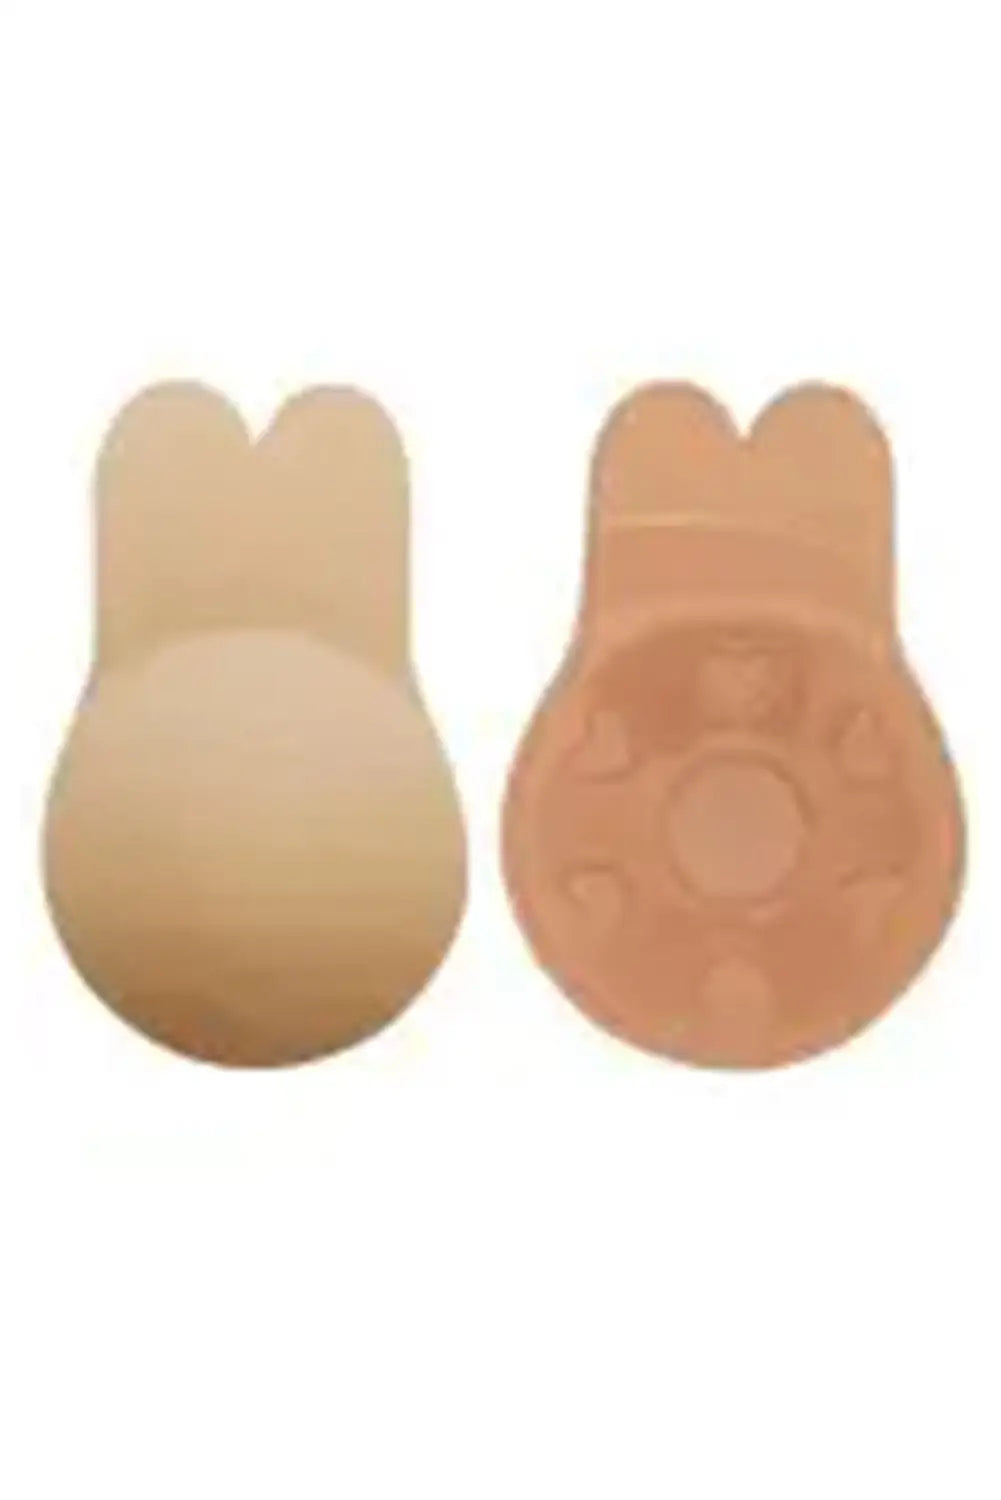 Nude invisible lift-up rabbit ears seamless nipple covers - lifting